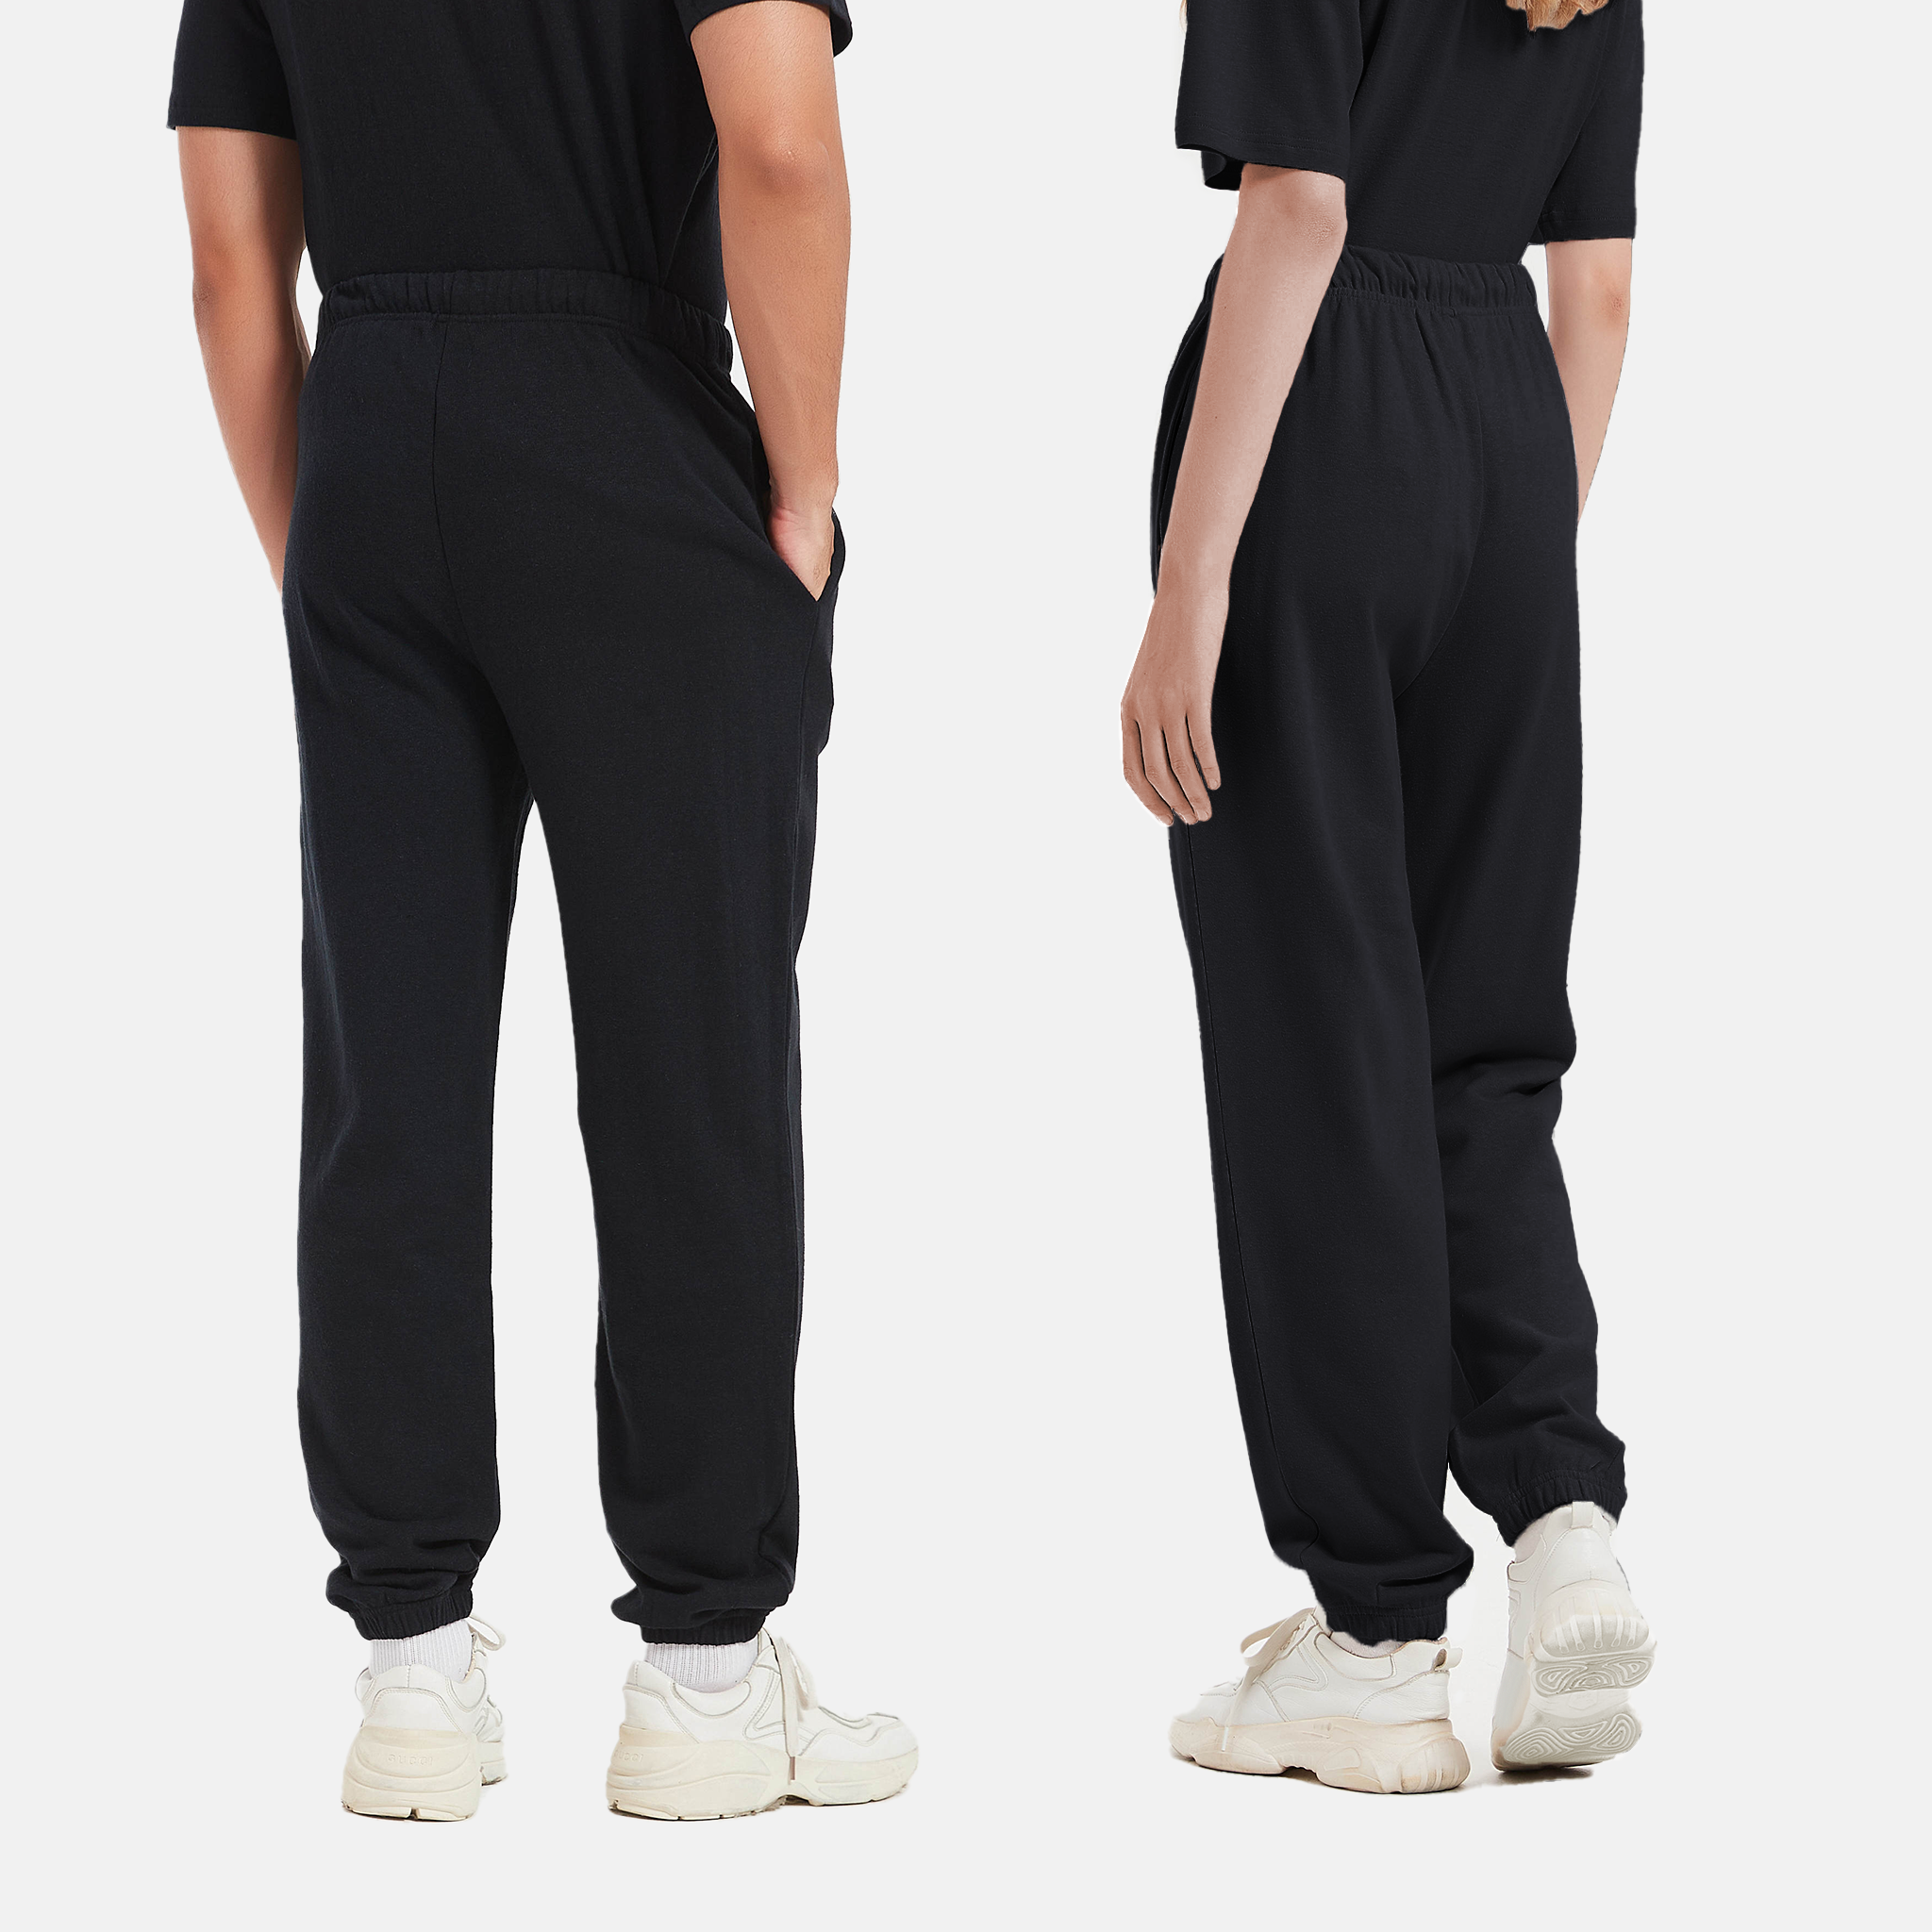 Eco-Friendly Black Sweatpants, Sustainable Style for Casual Comfort, Unisex